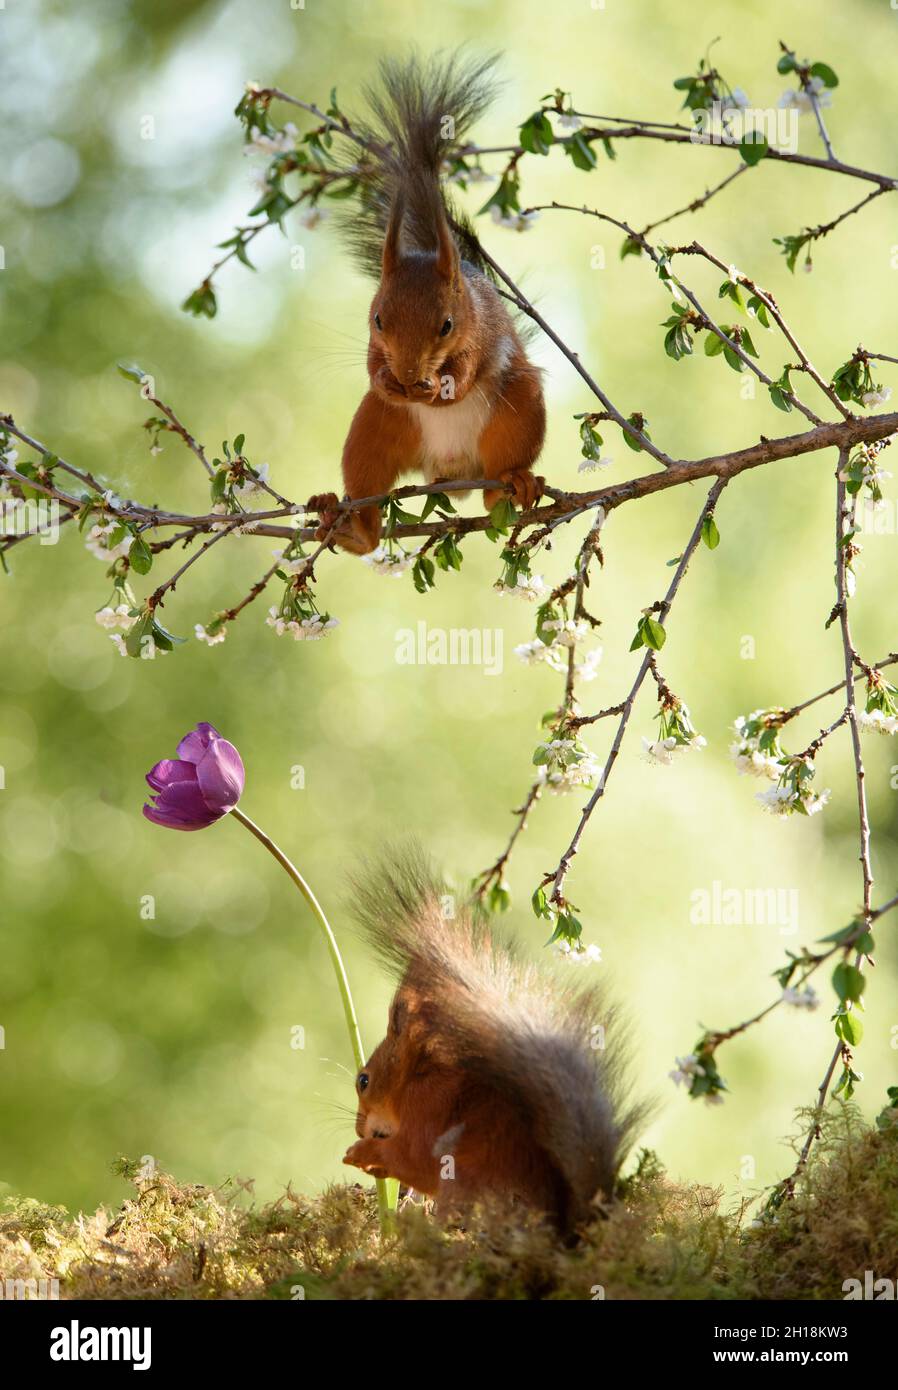 red squirrels are standing with a purple tulip and in flower cherry branches Stock Photo